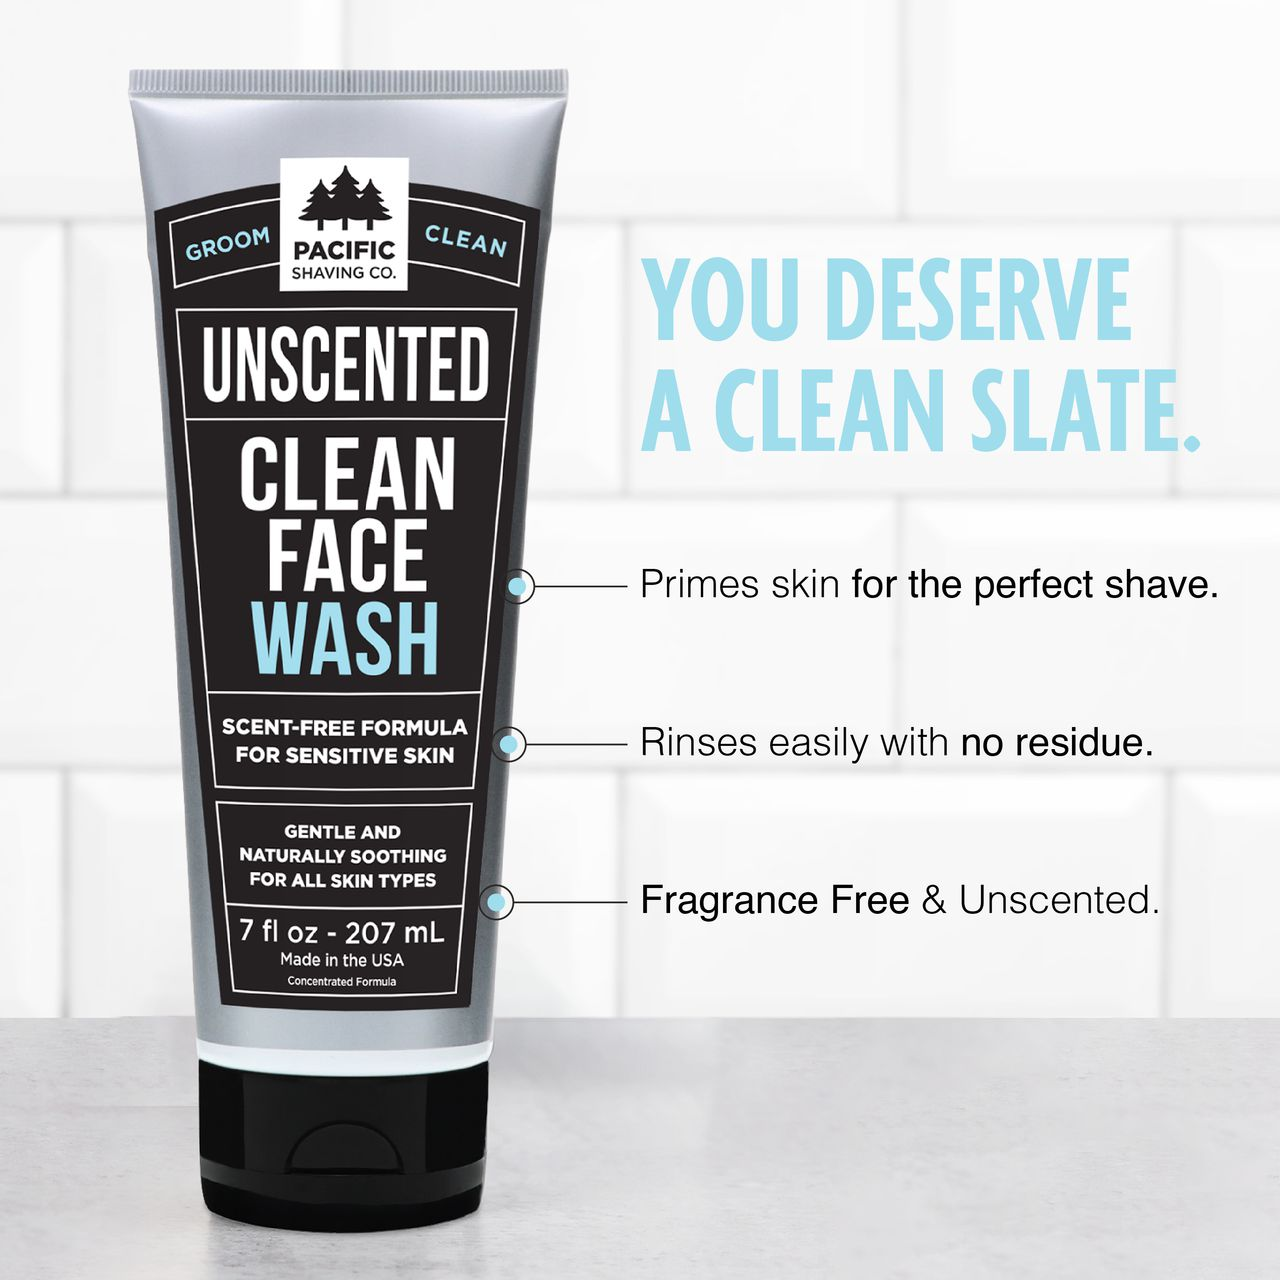 Clean, Unscented Face Wash.